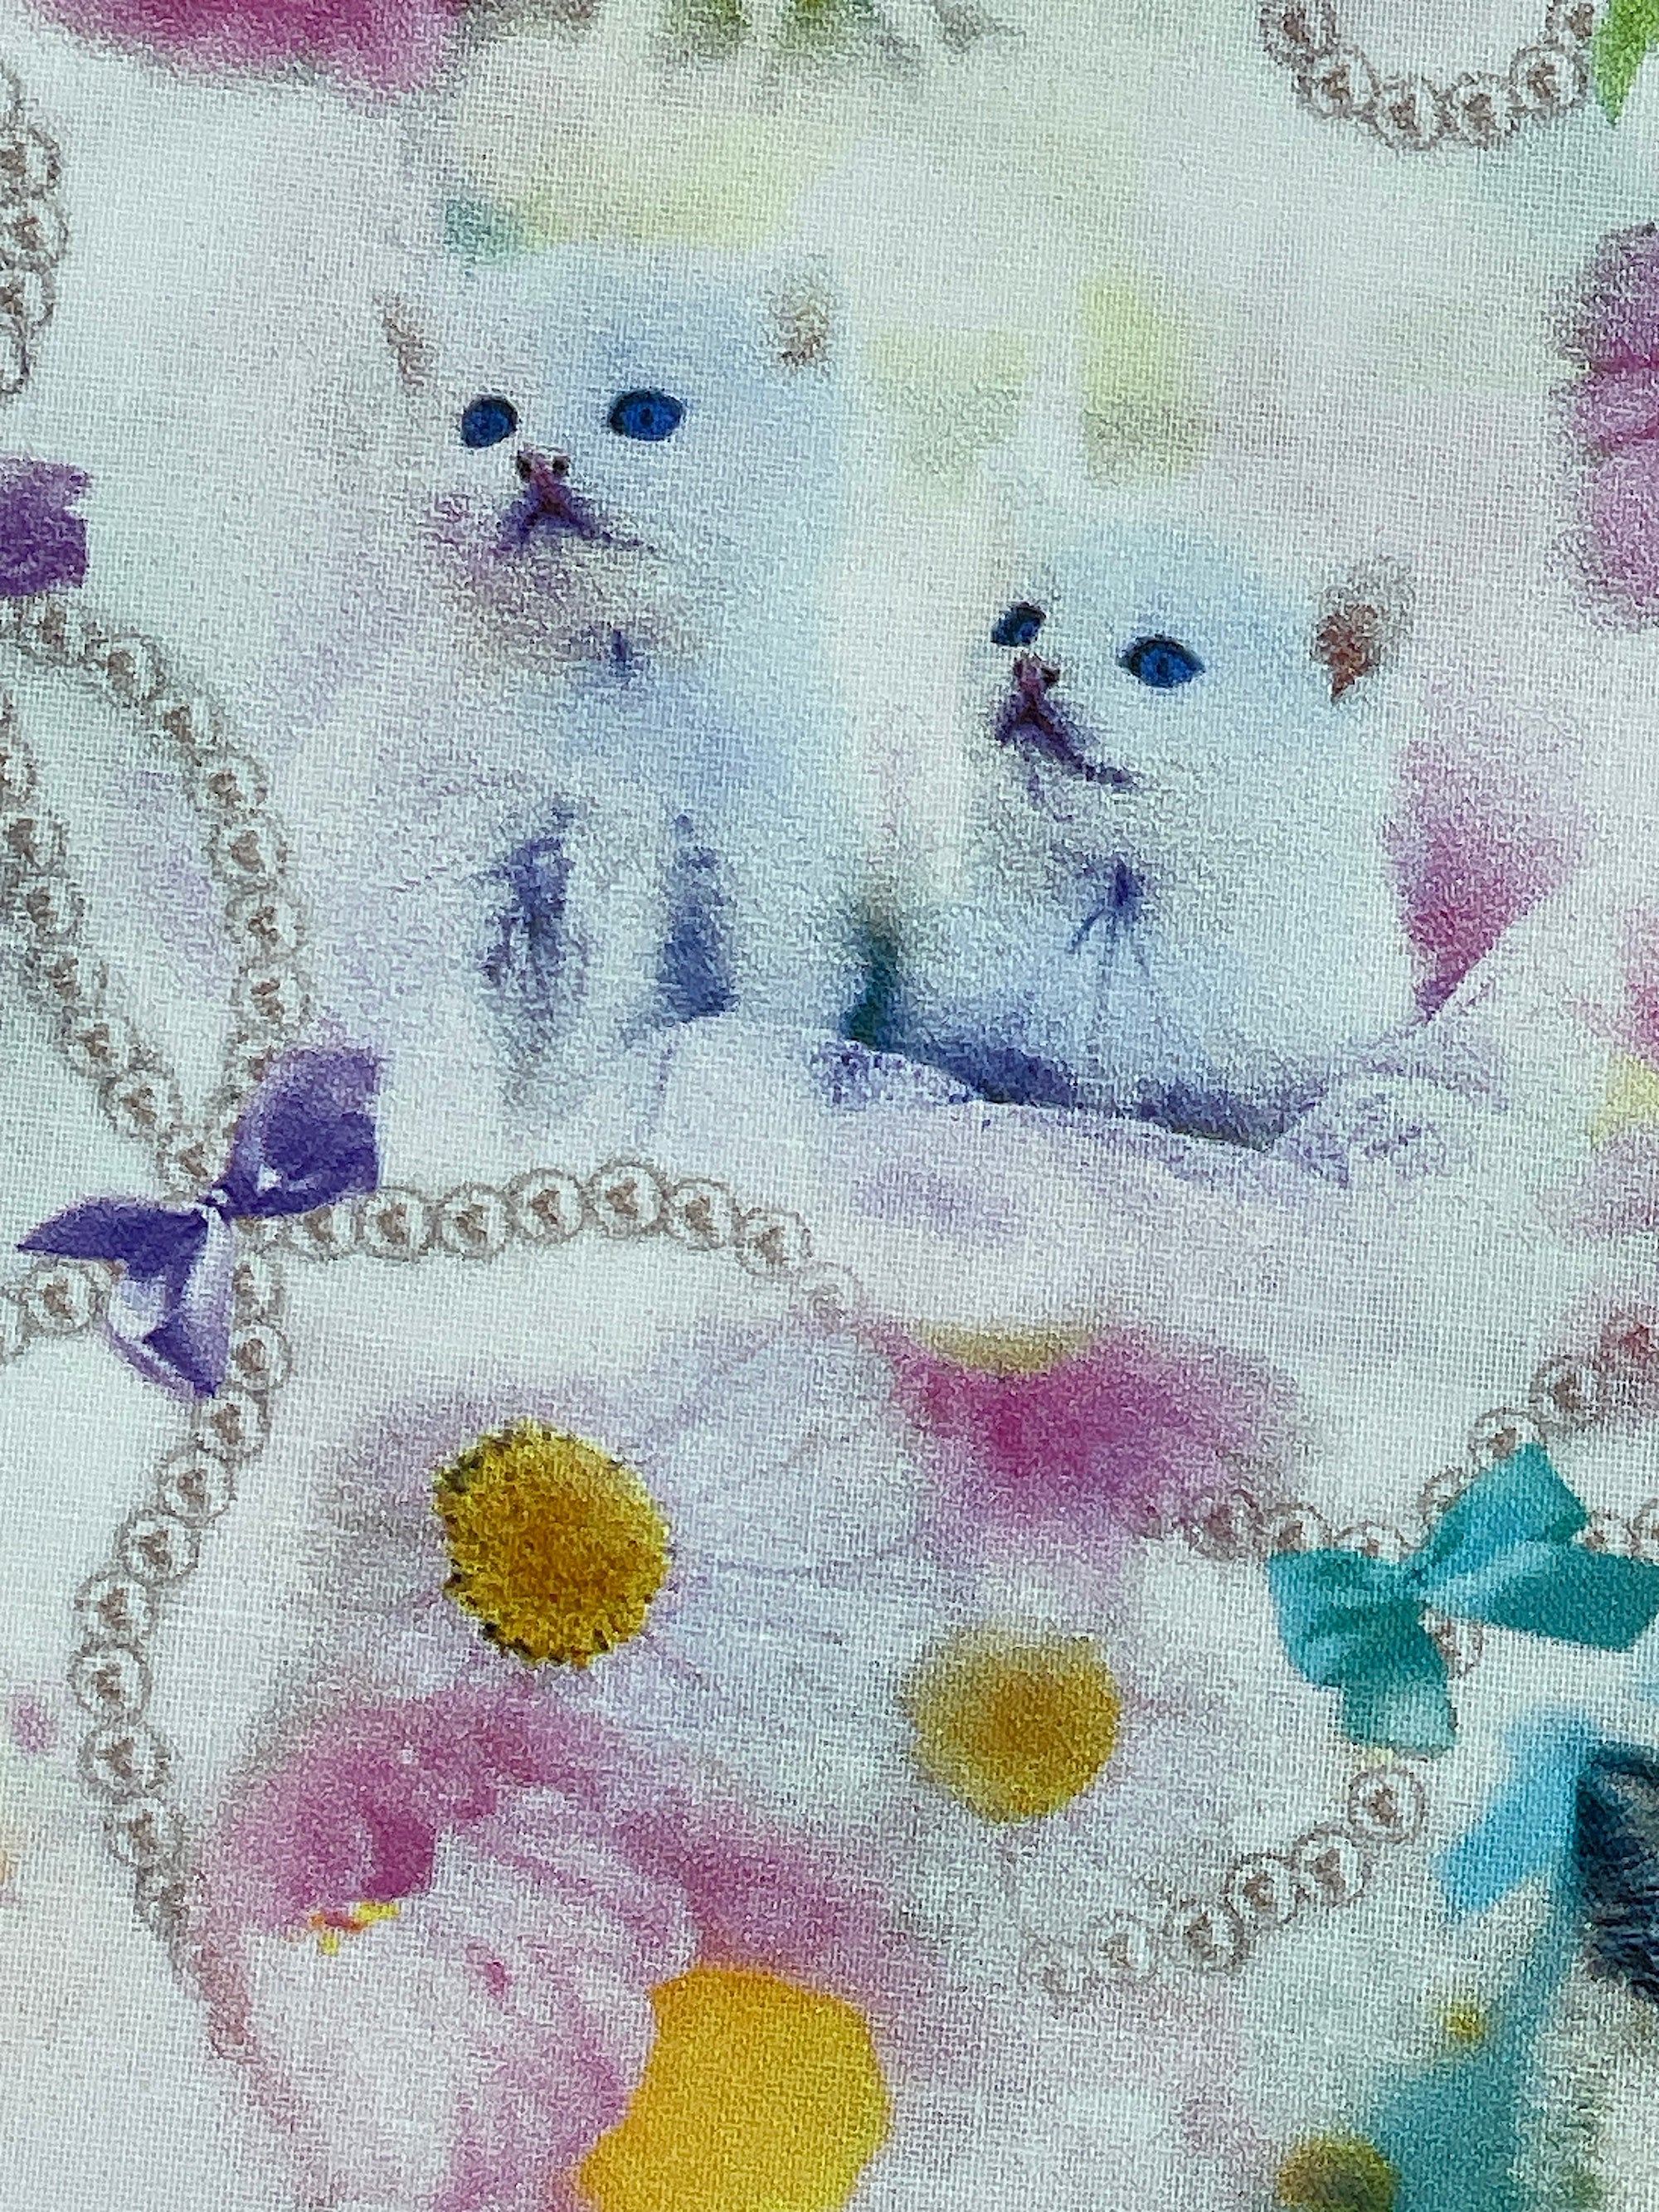 Two kittens within the flowers.